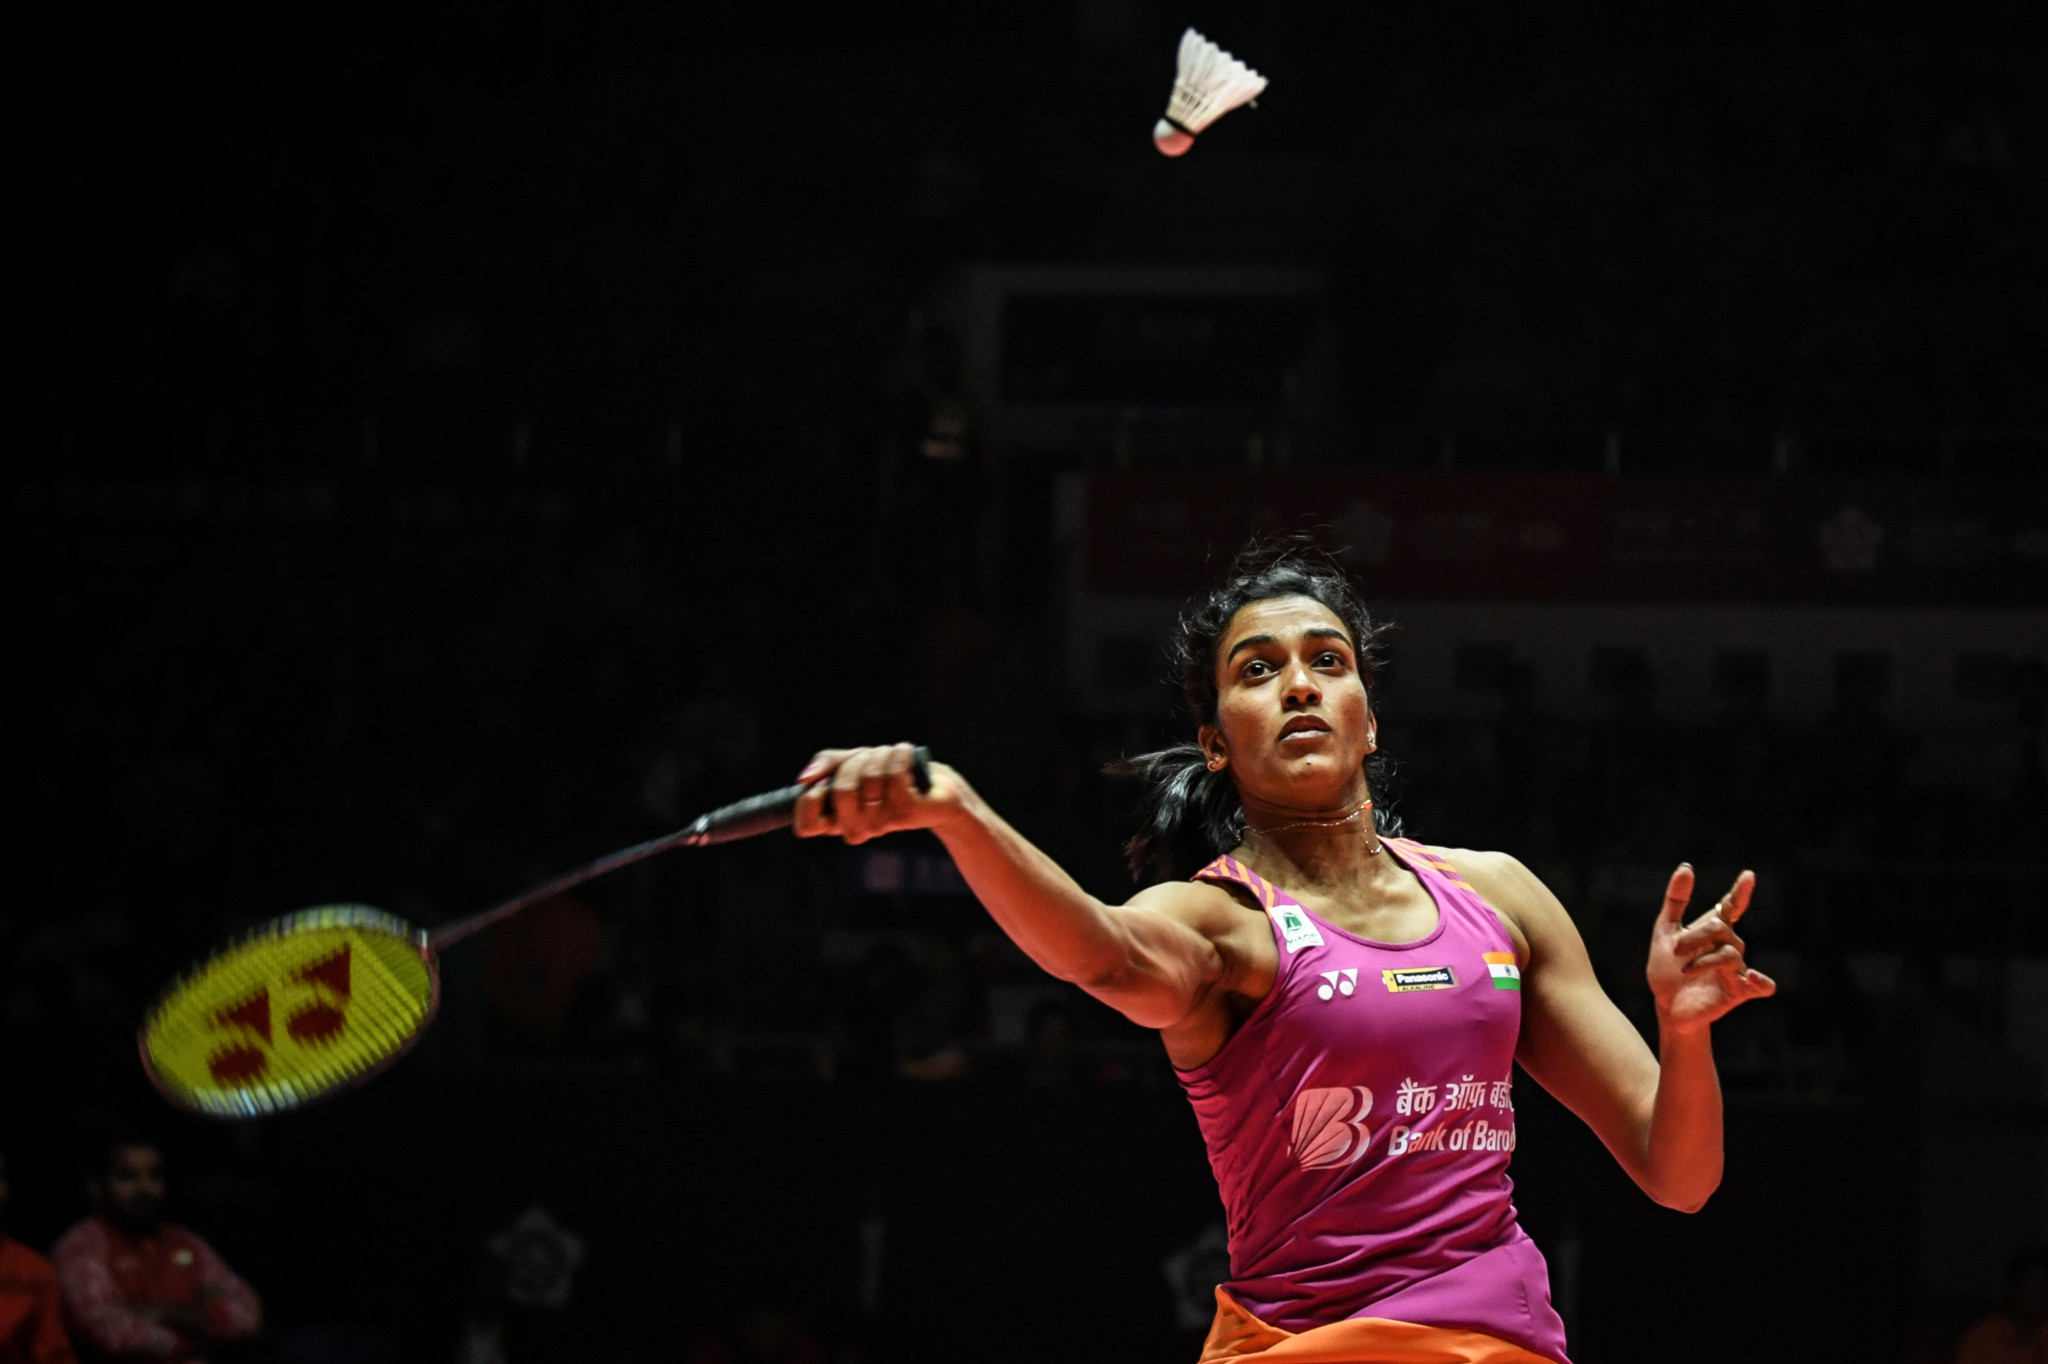 India's Pusarla Venkata Sindhu is through to the quarter-finals of the women's singles event ©Getty Images